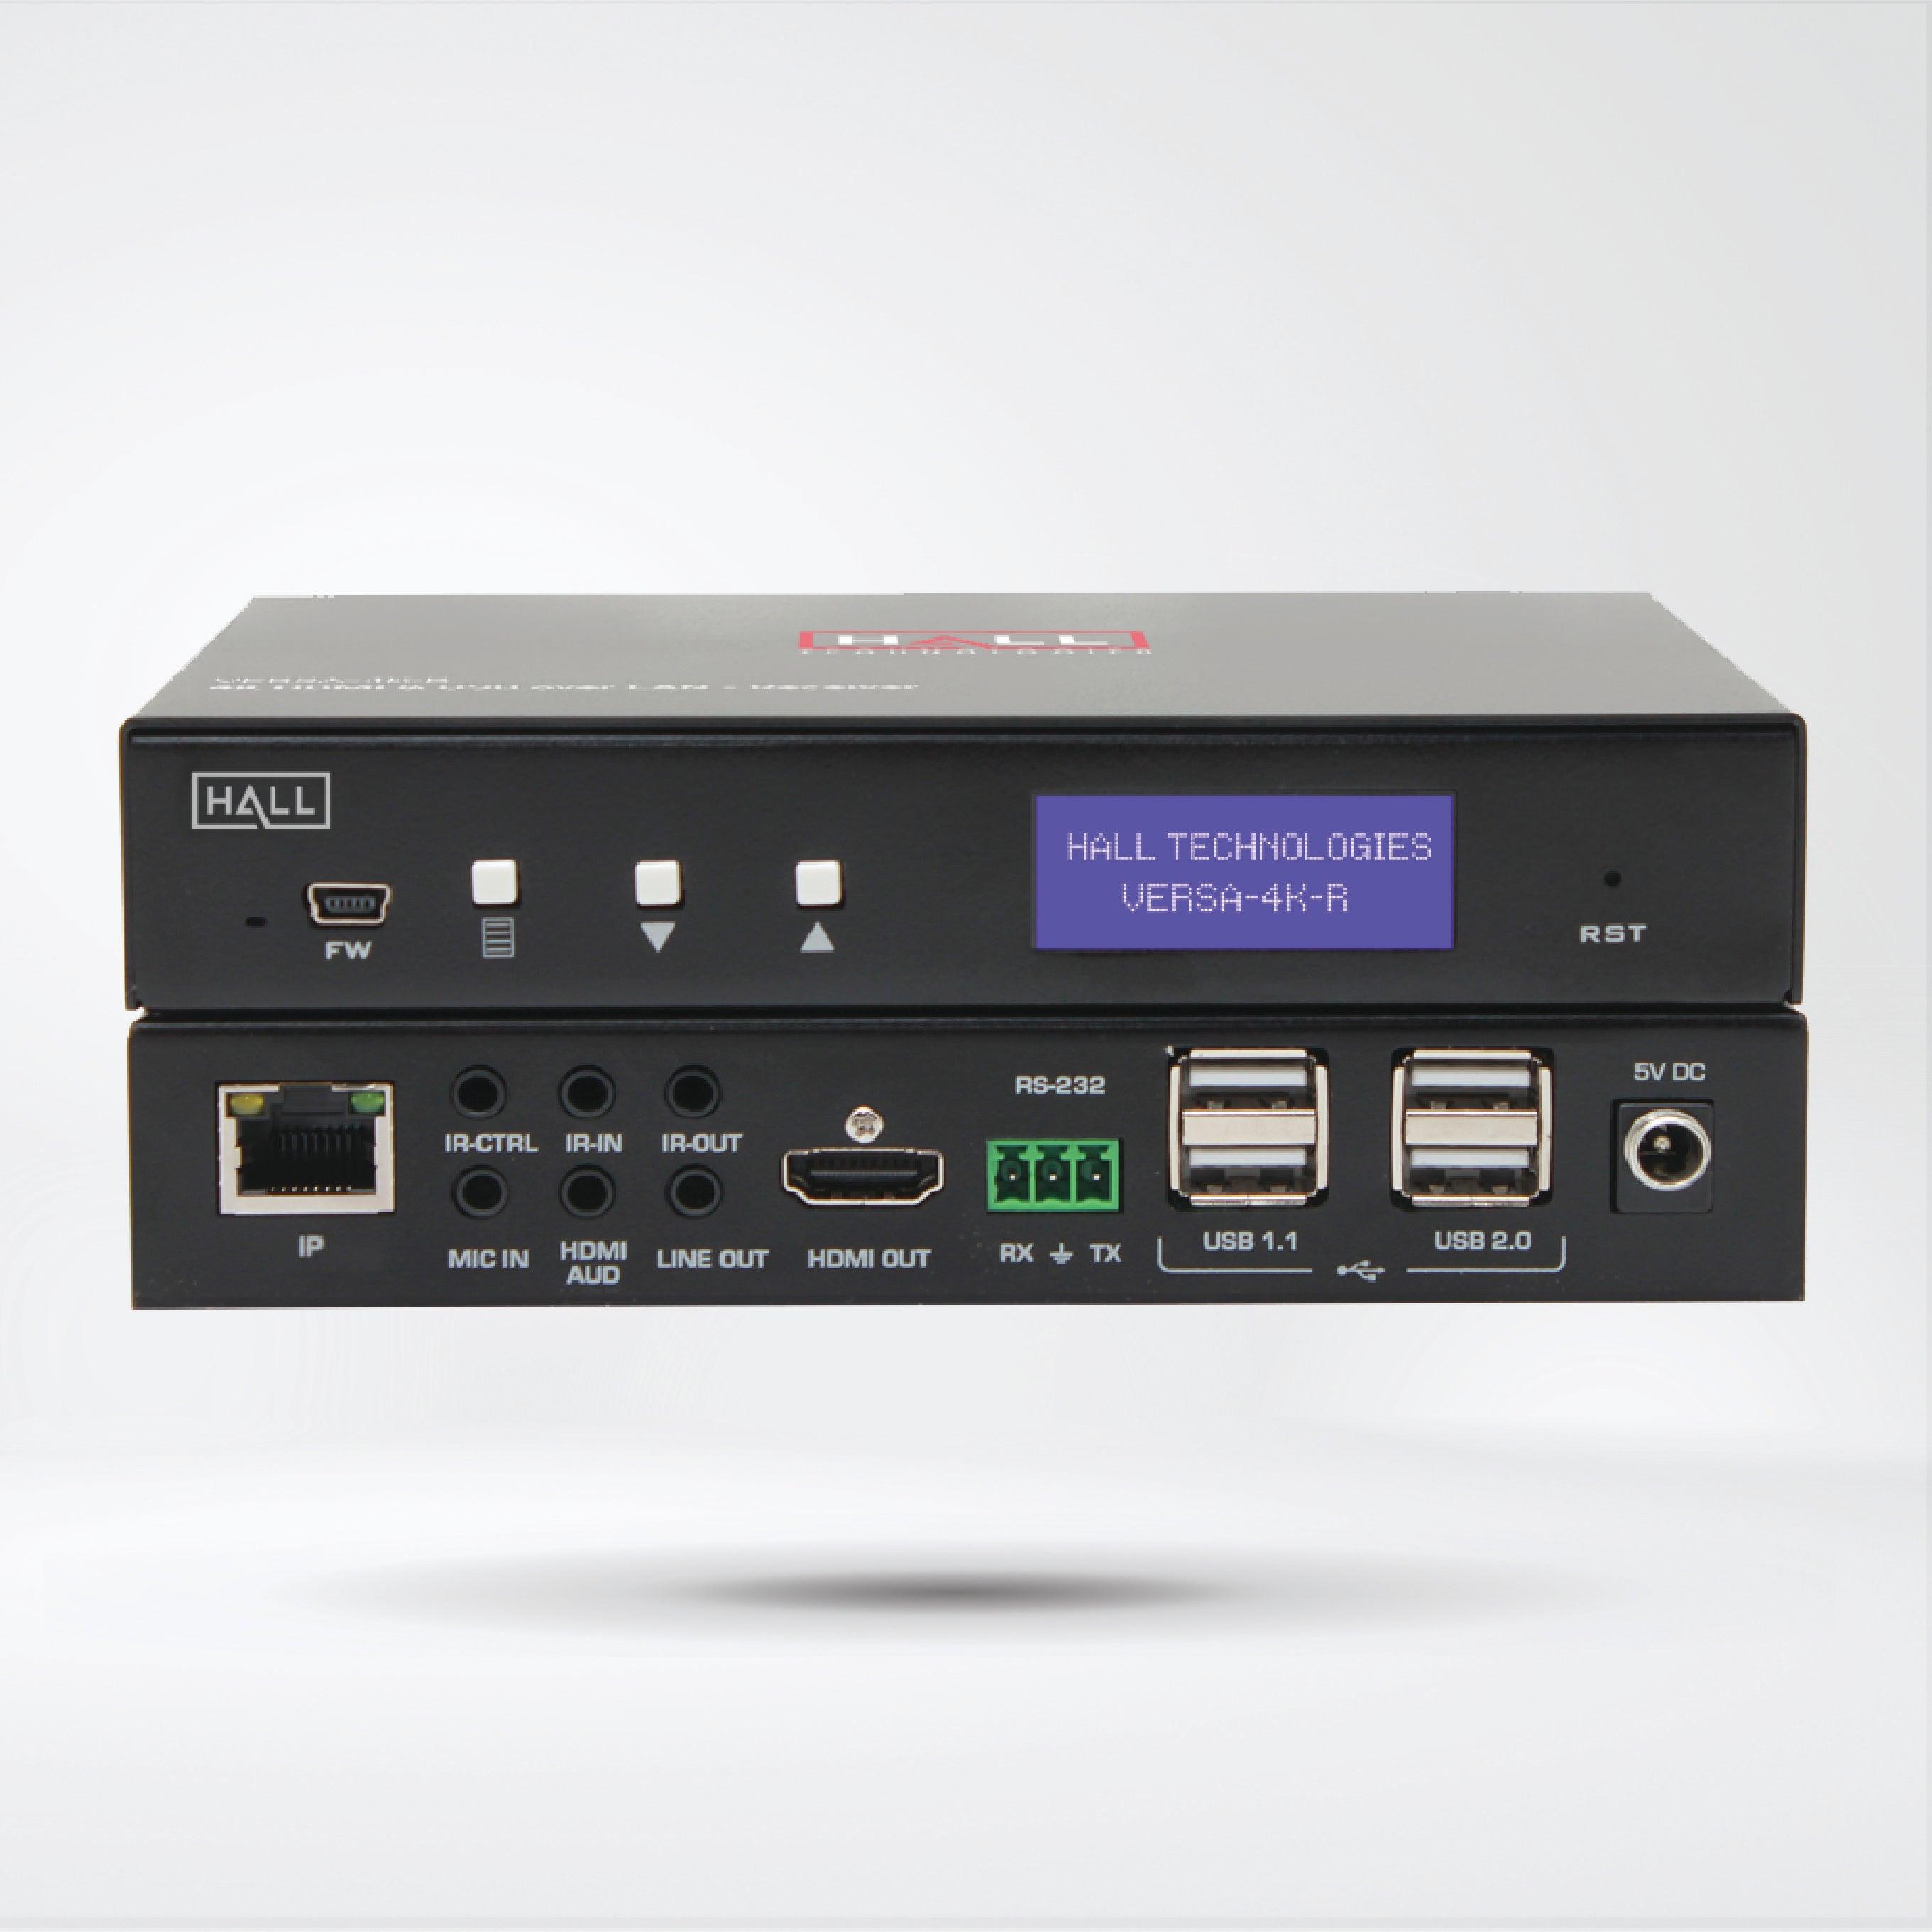 VERSA-4K-R 4K Video & USB Extension for Point-to-Point or Matrix over IP - Riverplus